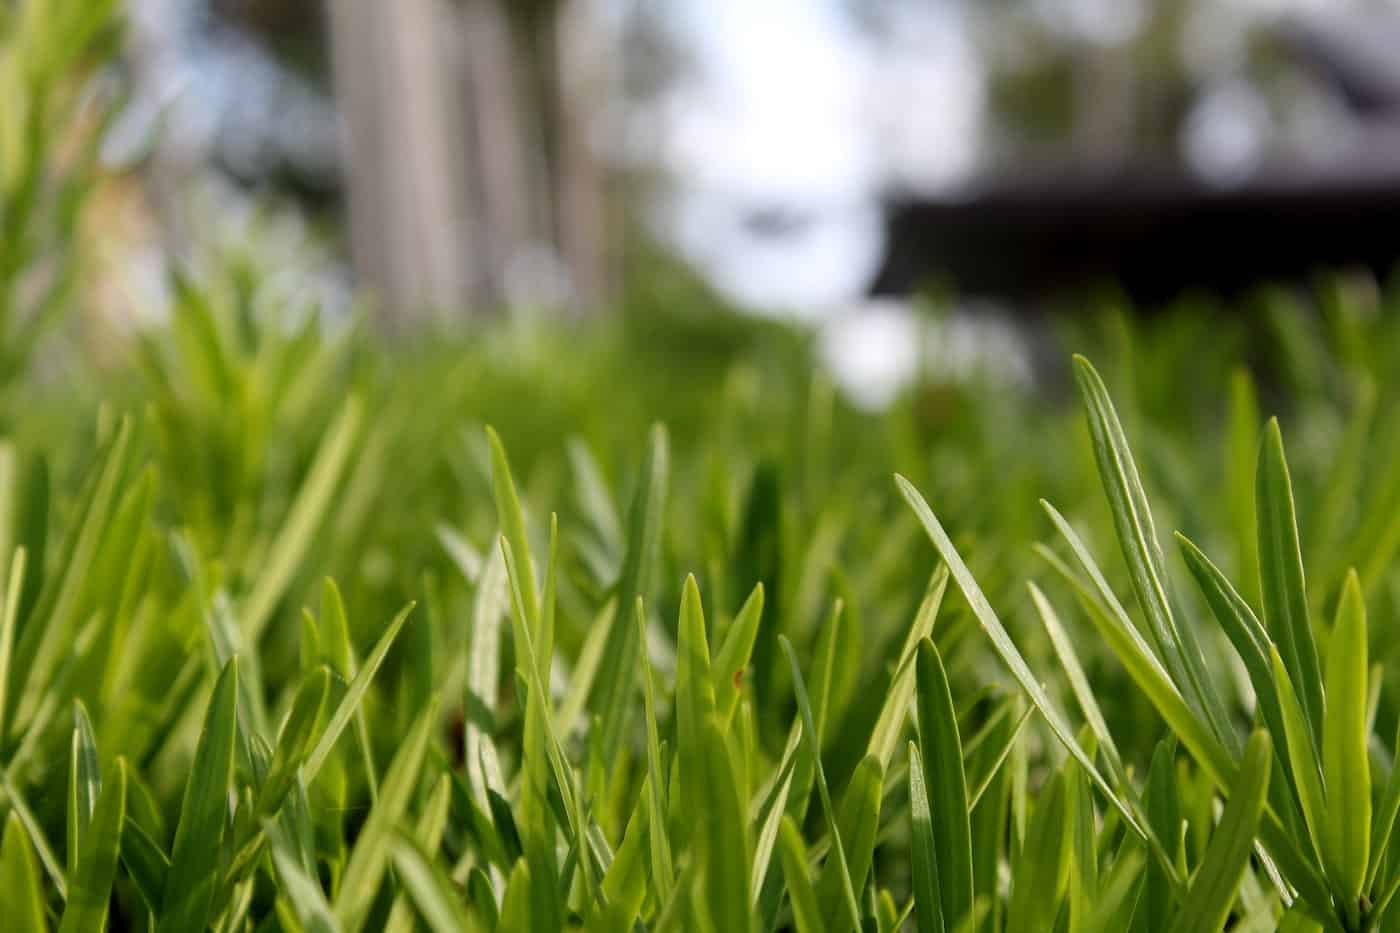 JD Smith Blog Post - Increase Your Home’s Value with Lawn Pest Control